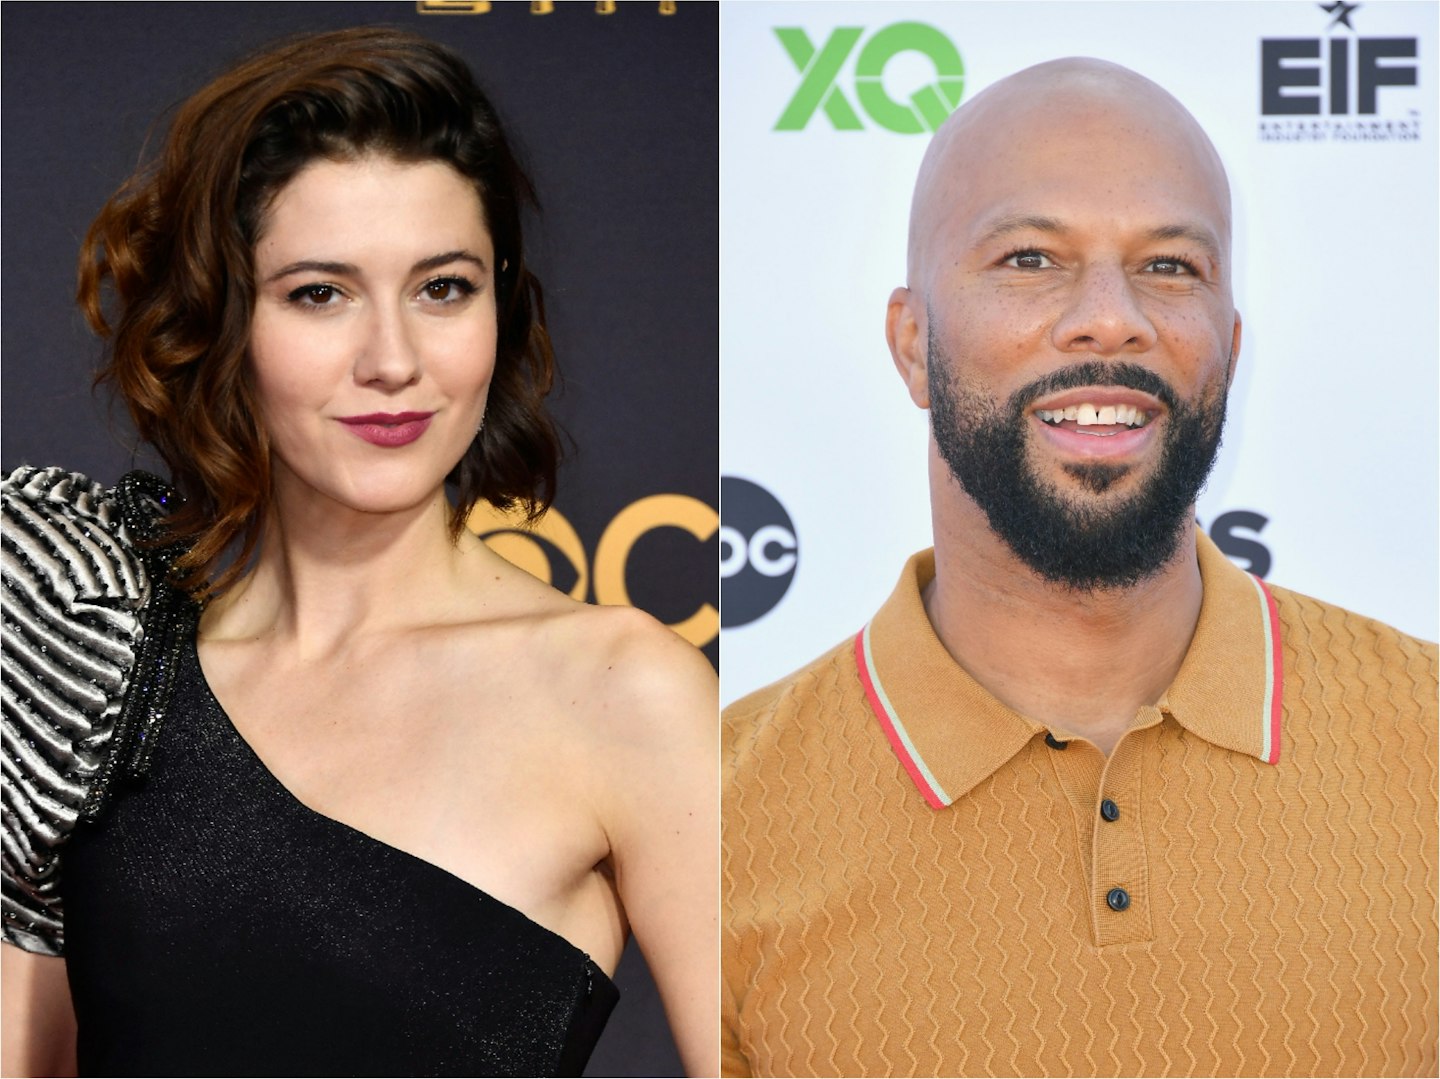 Mary Elizabeth Winstead and Common